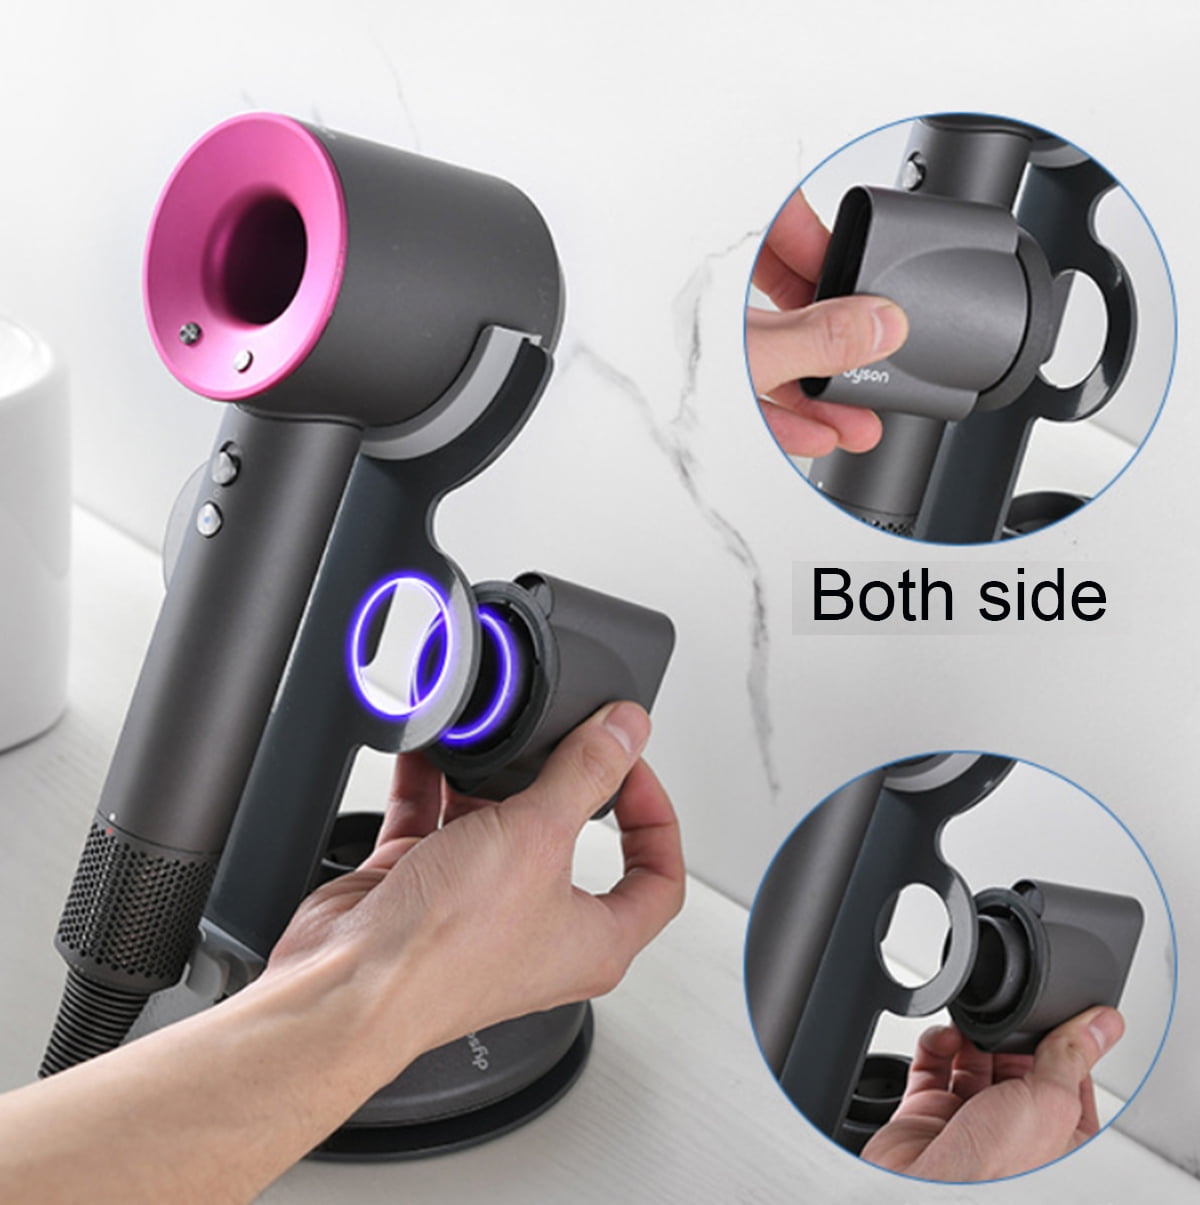 Hair Dryer Stand Holder for Dyson Supersonic Hair Dryer, Hair Blow Dryer  Stand Rack Organizer Compatible for Dyson Supersonic Hair Dryer, Diffuser,  Nozzle 